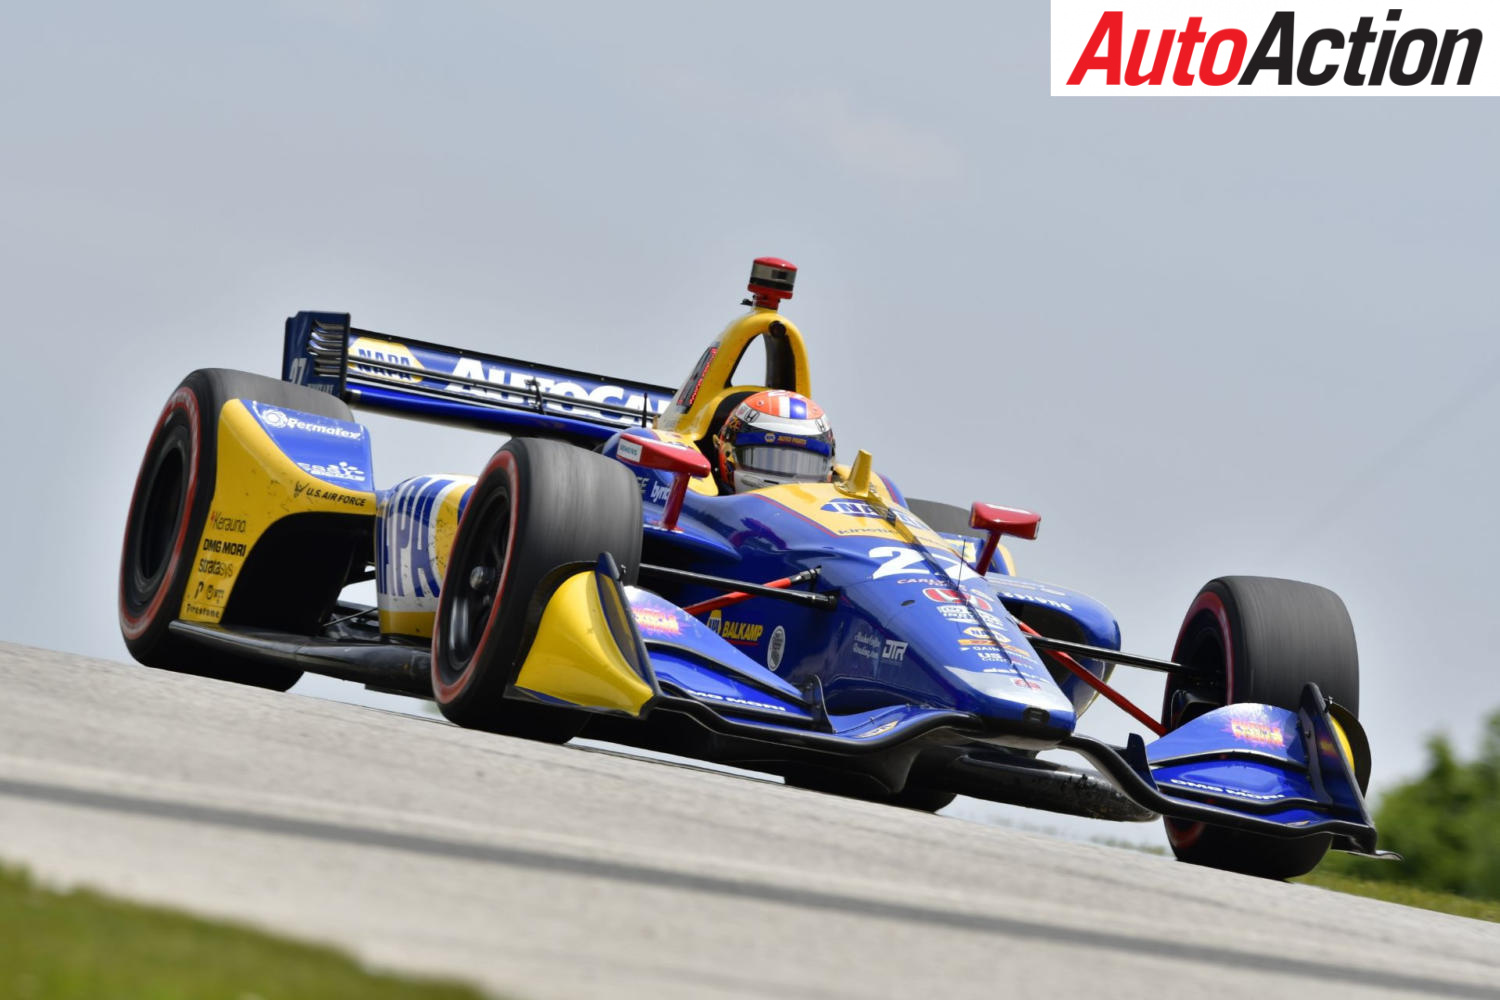 Alexander Rossi was a league of his own at Road America - Photo: LAT